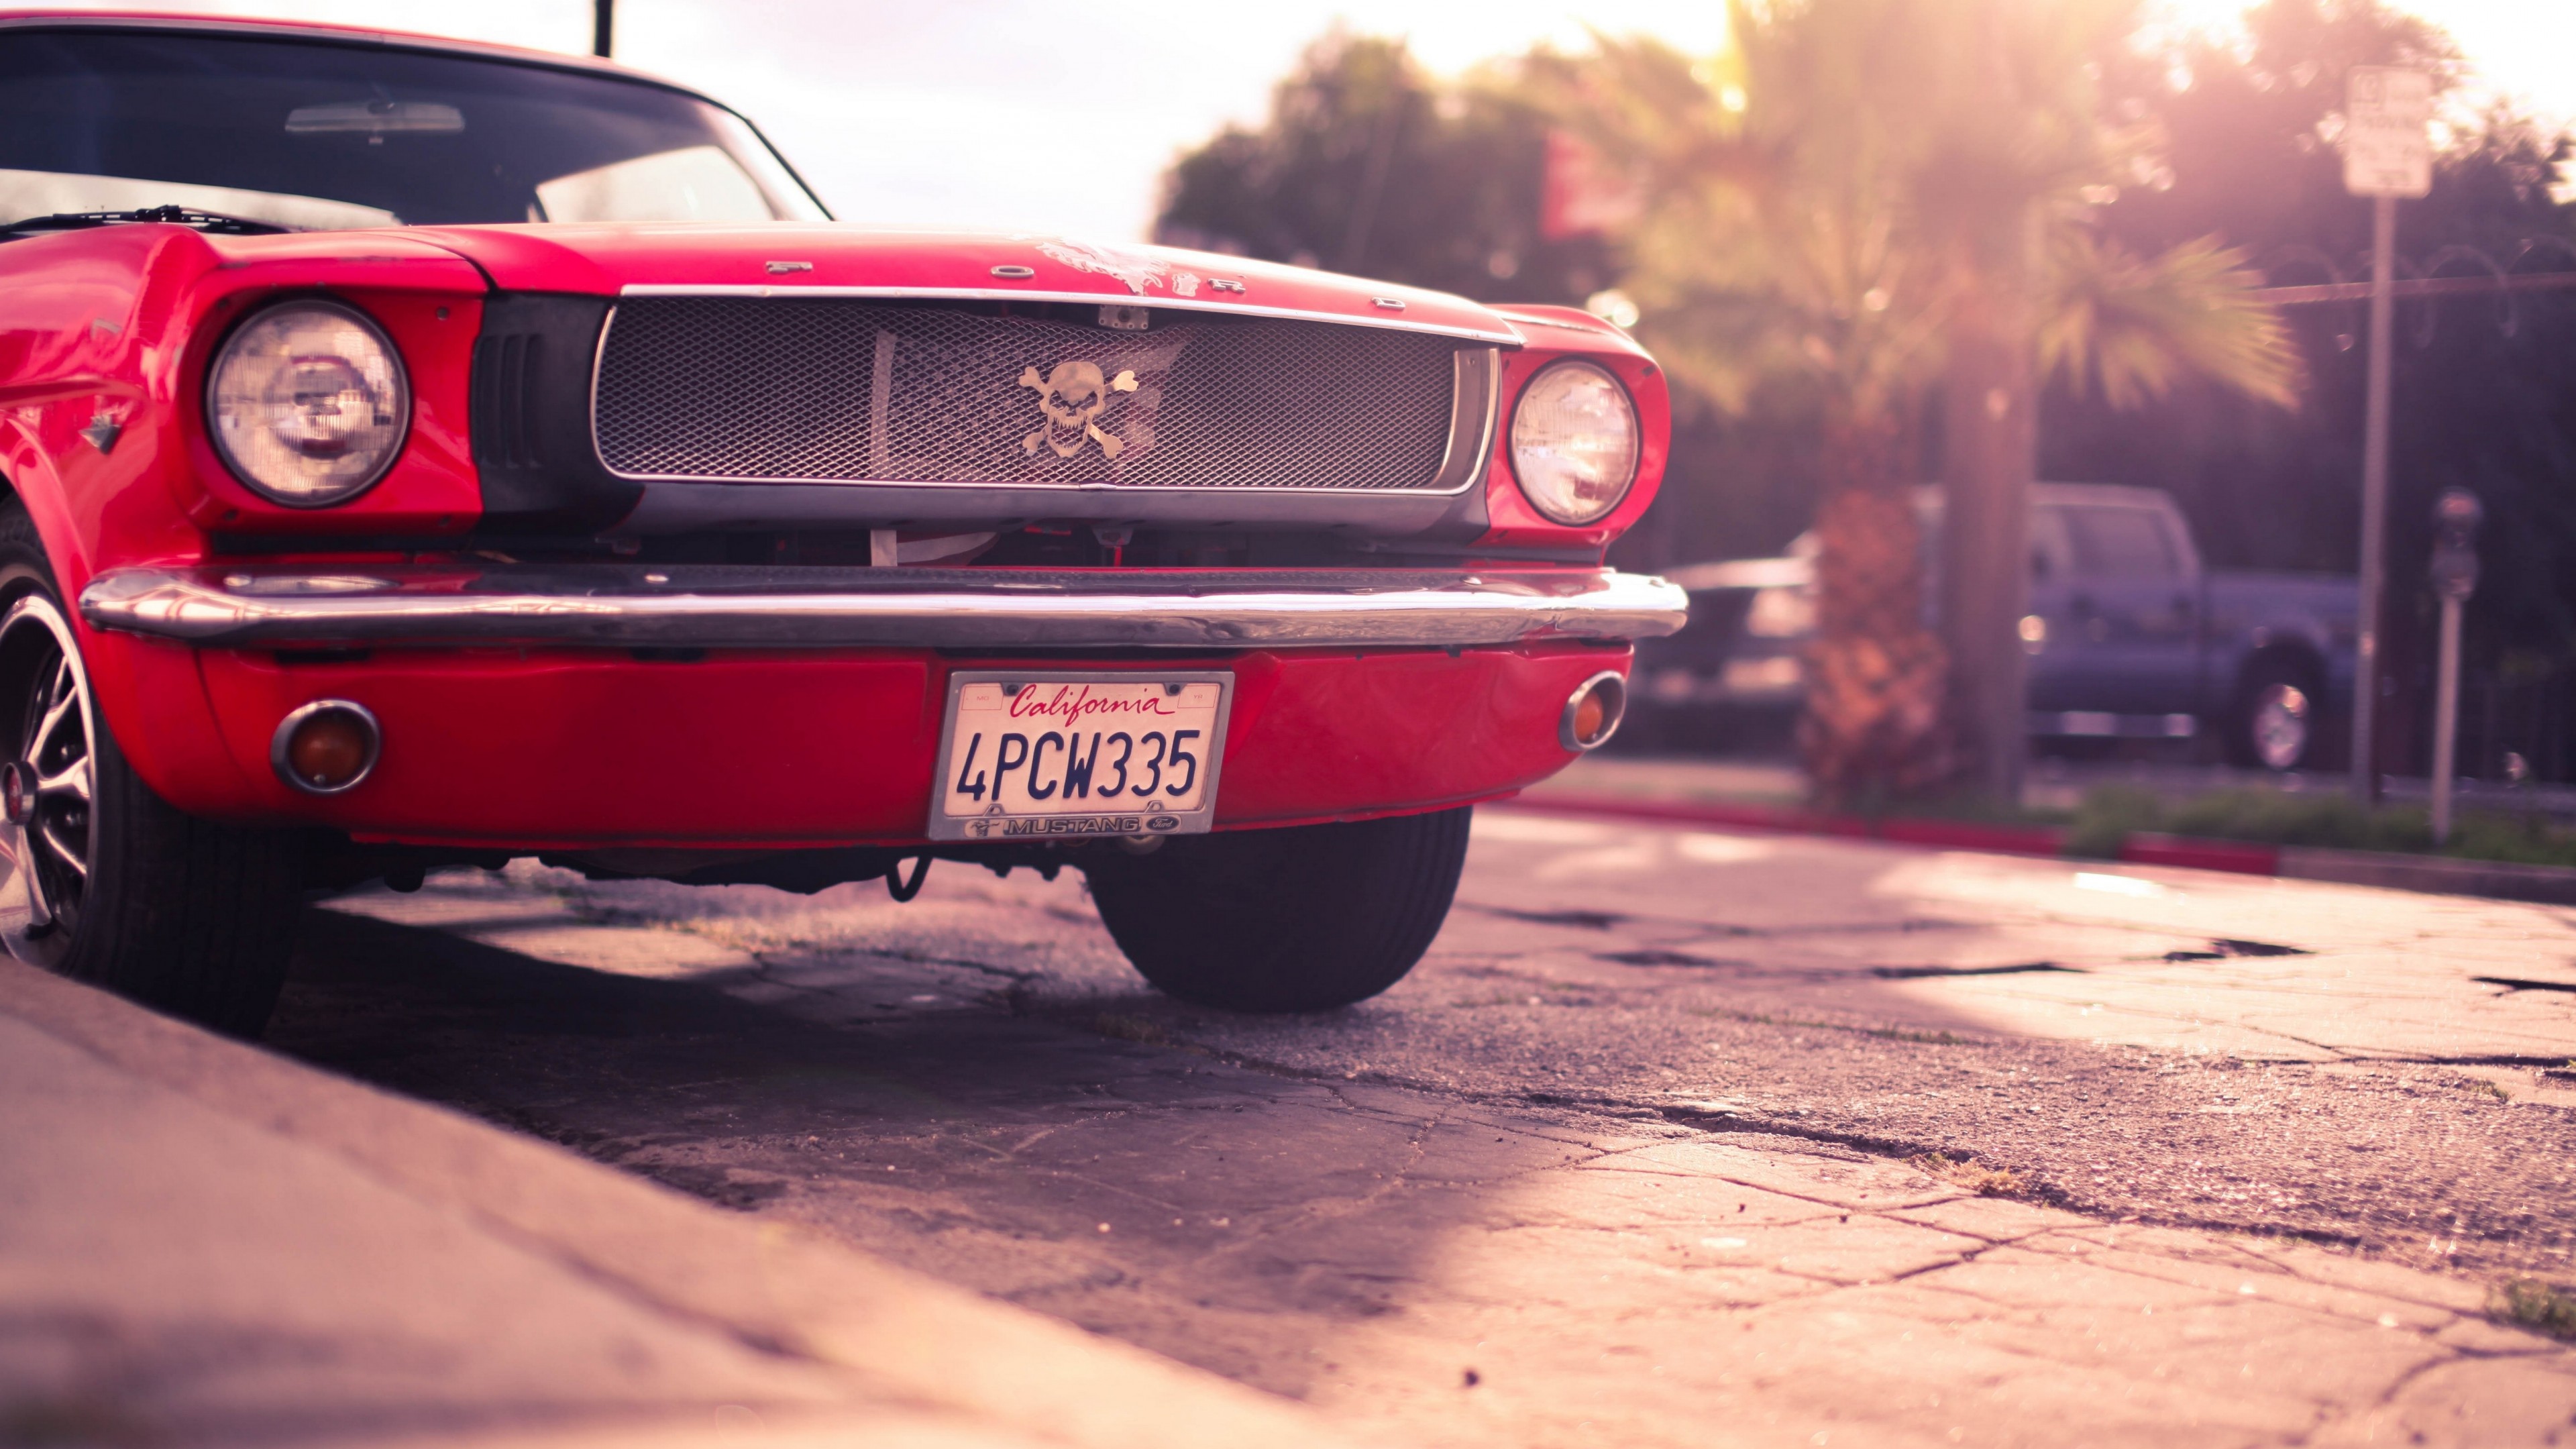 Ford Classic Cars Wallpapers